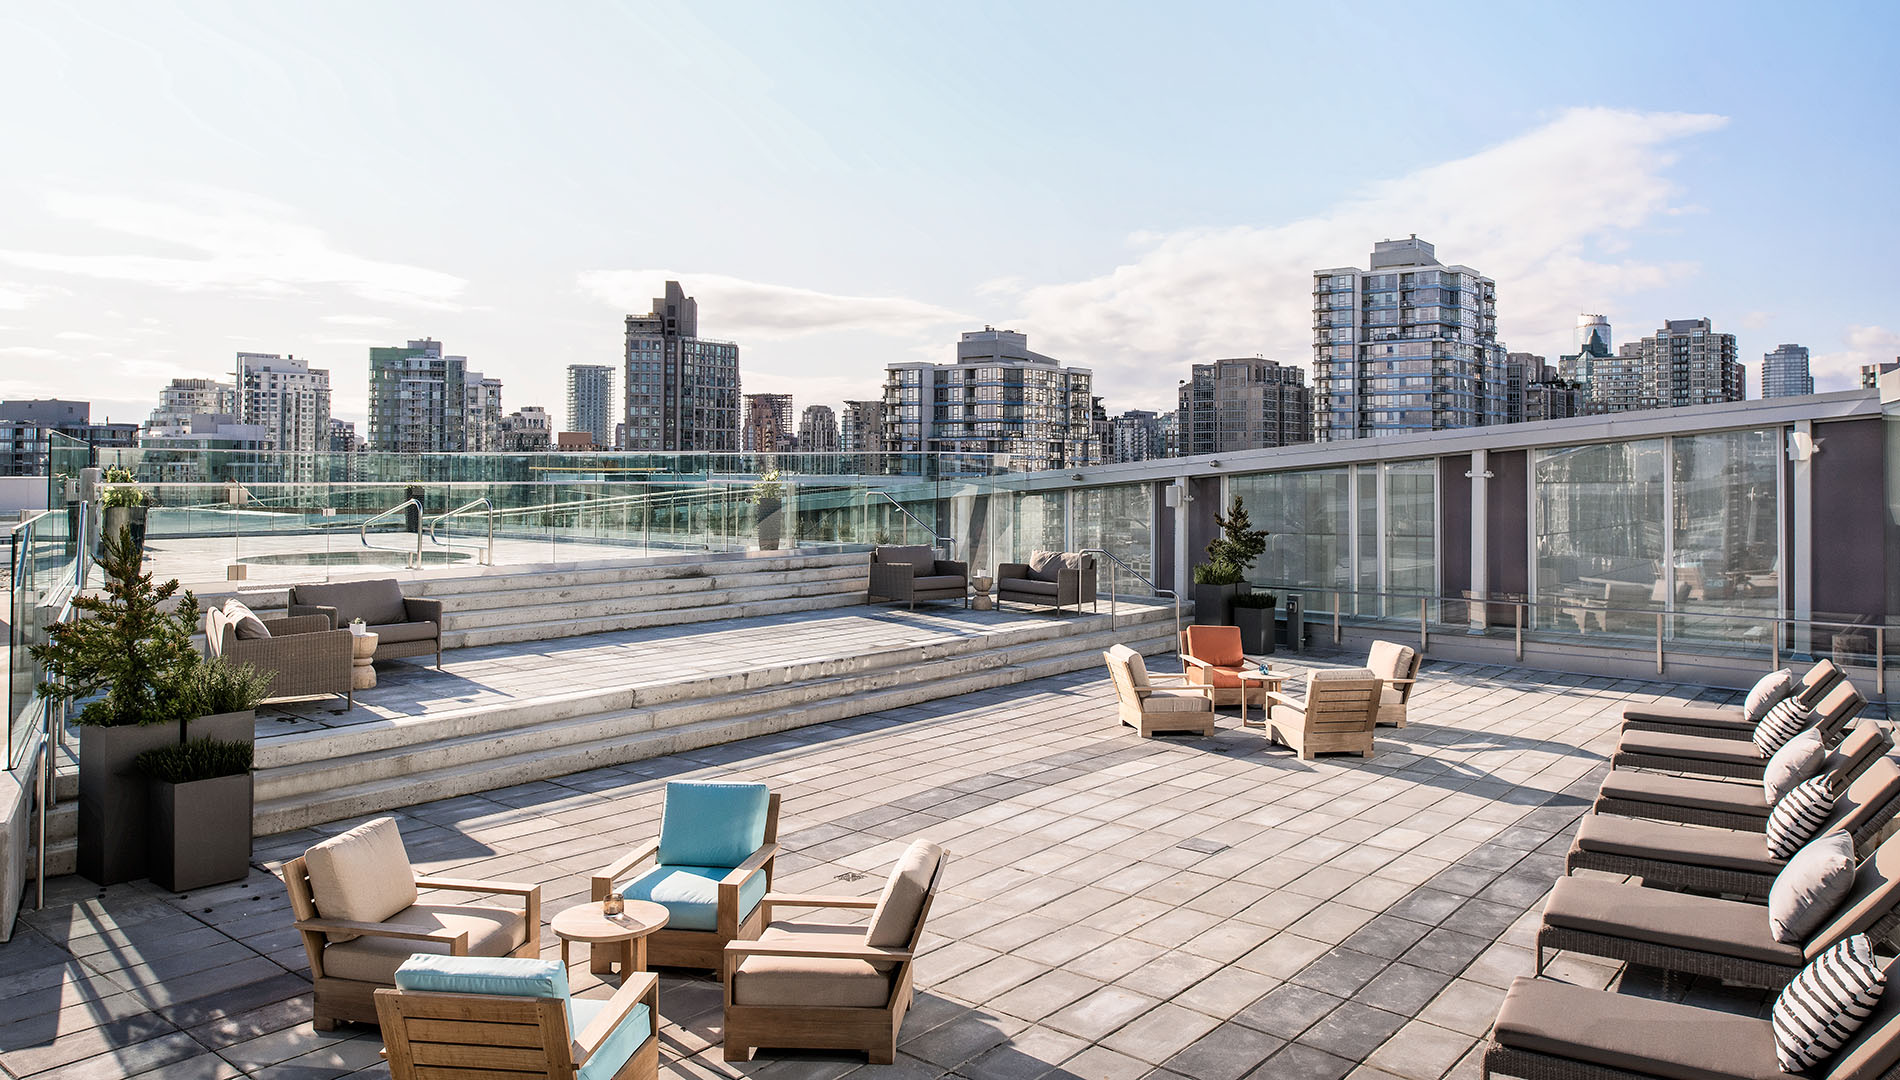 roof pool and lounge view of Vancouver from the JW Marriott Parq Vancouver